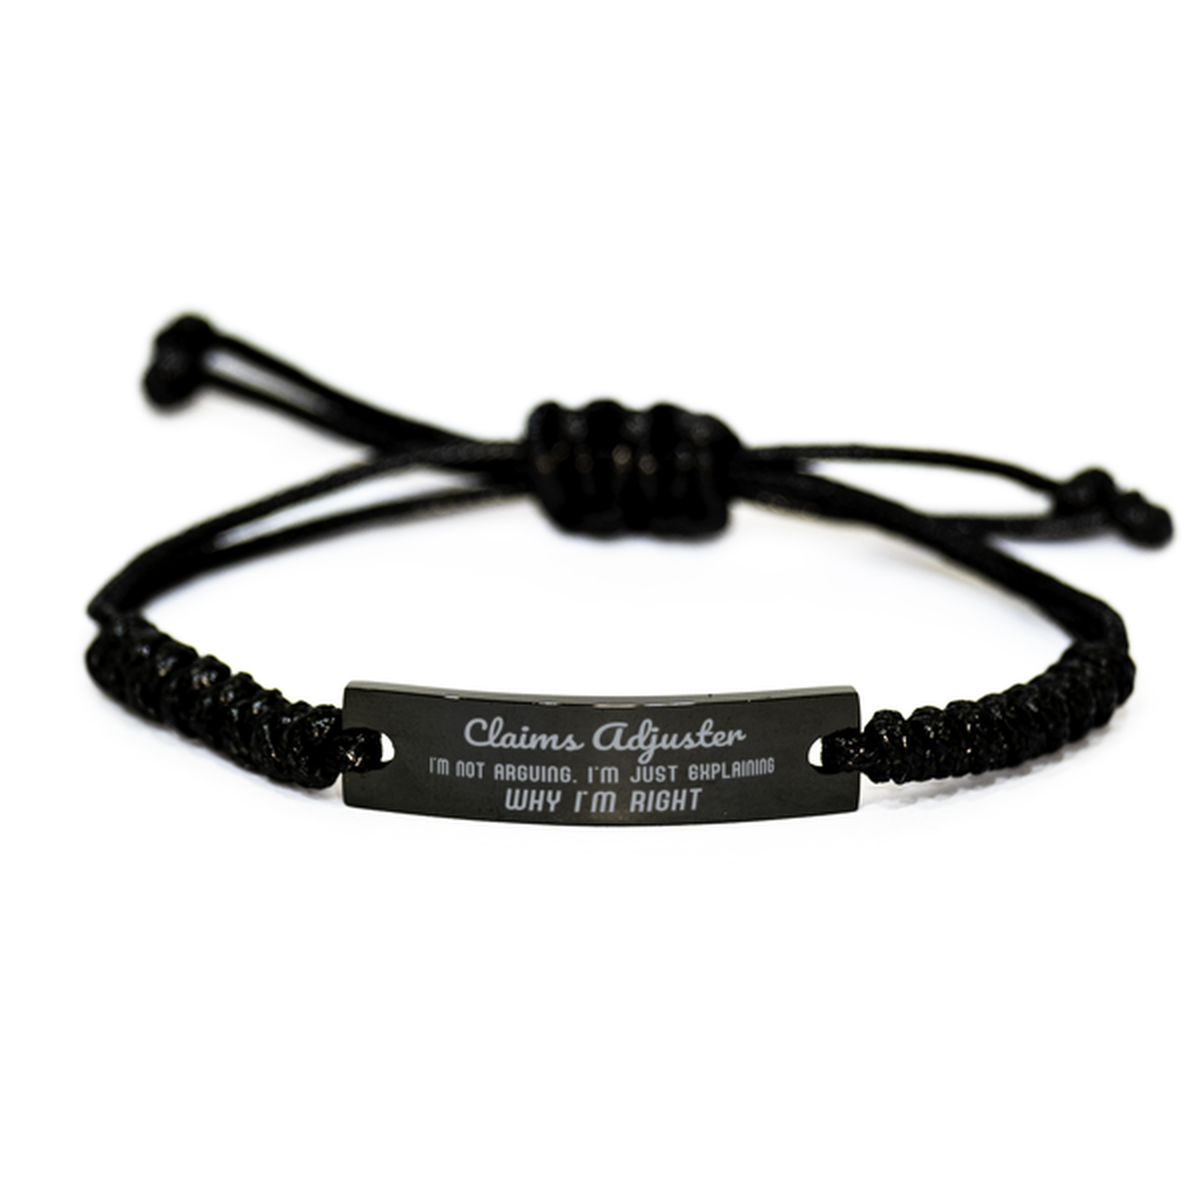 Claims Adjuster I'm not Arguing. I'm Just Explaining Why I'm RIGHT Black Rope Bracelet, Funny Saying Quote Claims Adjuster Gifts For Claims Adjuster Graduation Birthday Christmas Gifts for Men Women Coworker